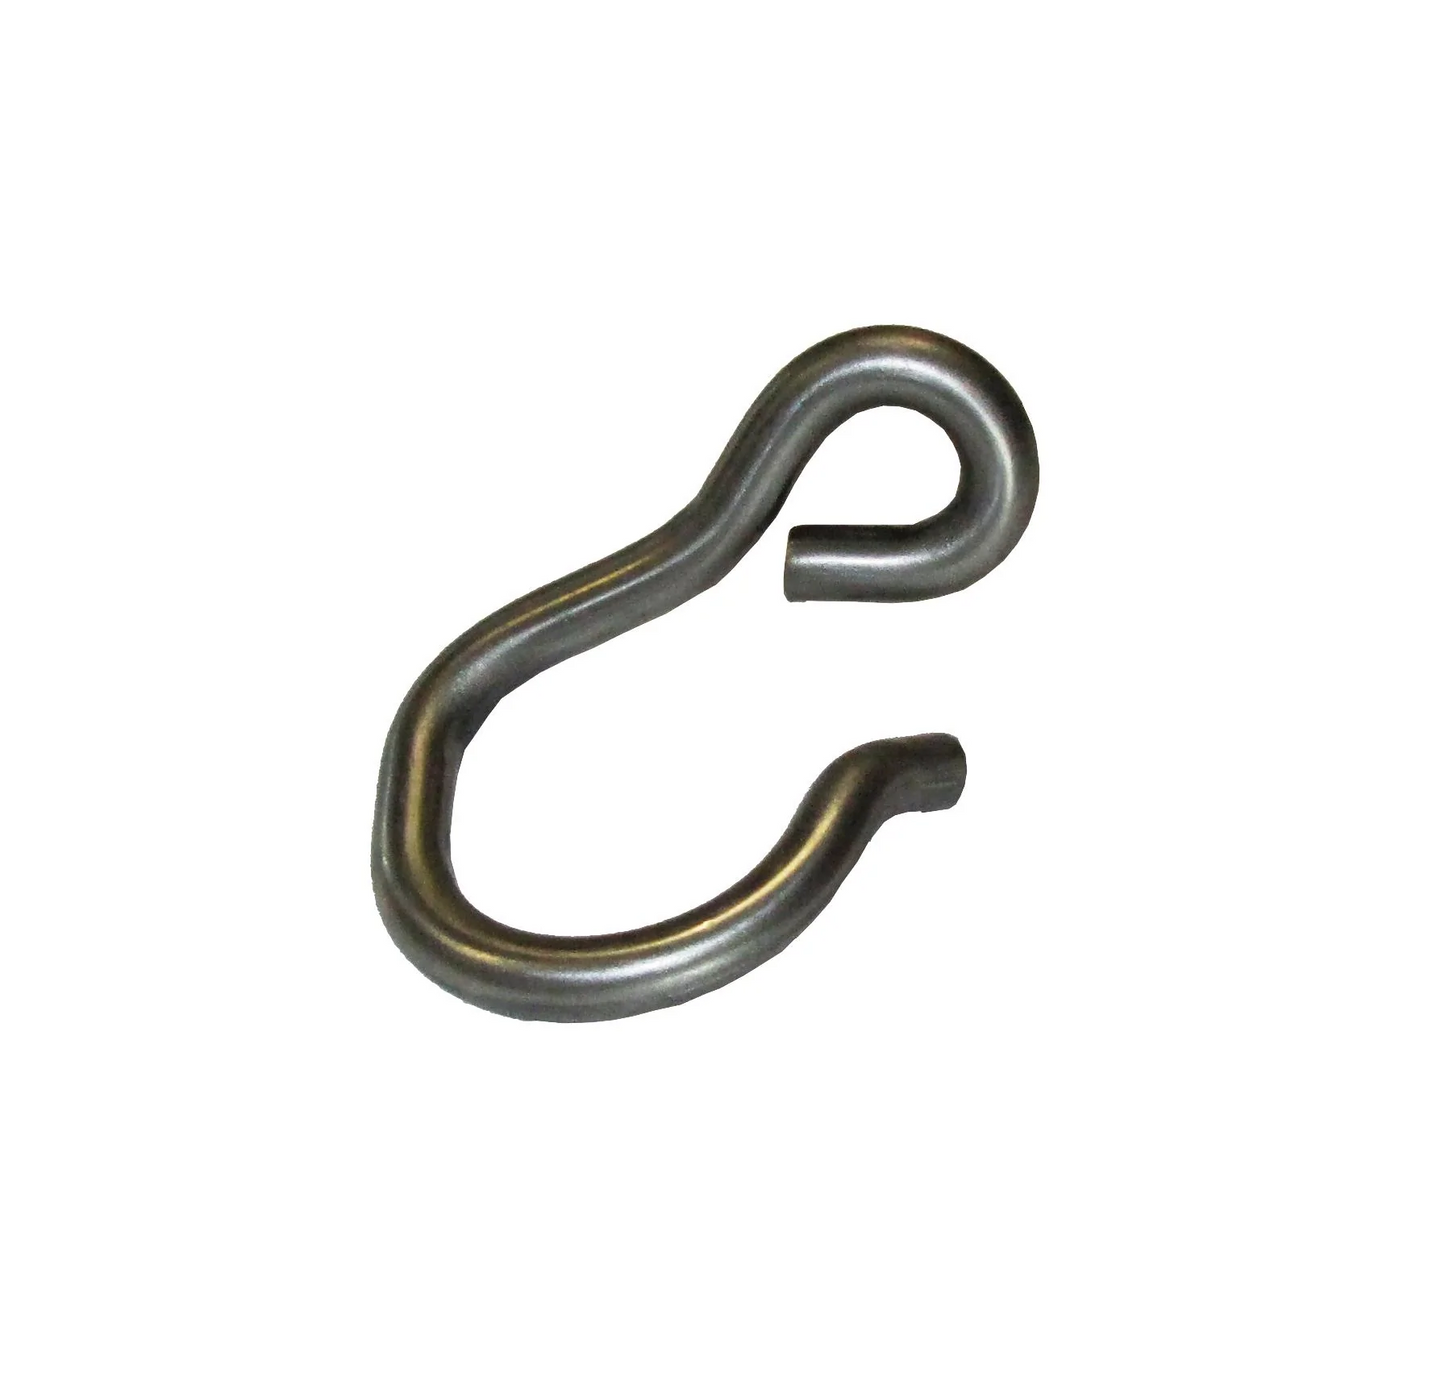 Portable Winch Replacement Rope Entry Hook 10-0136